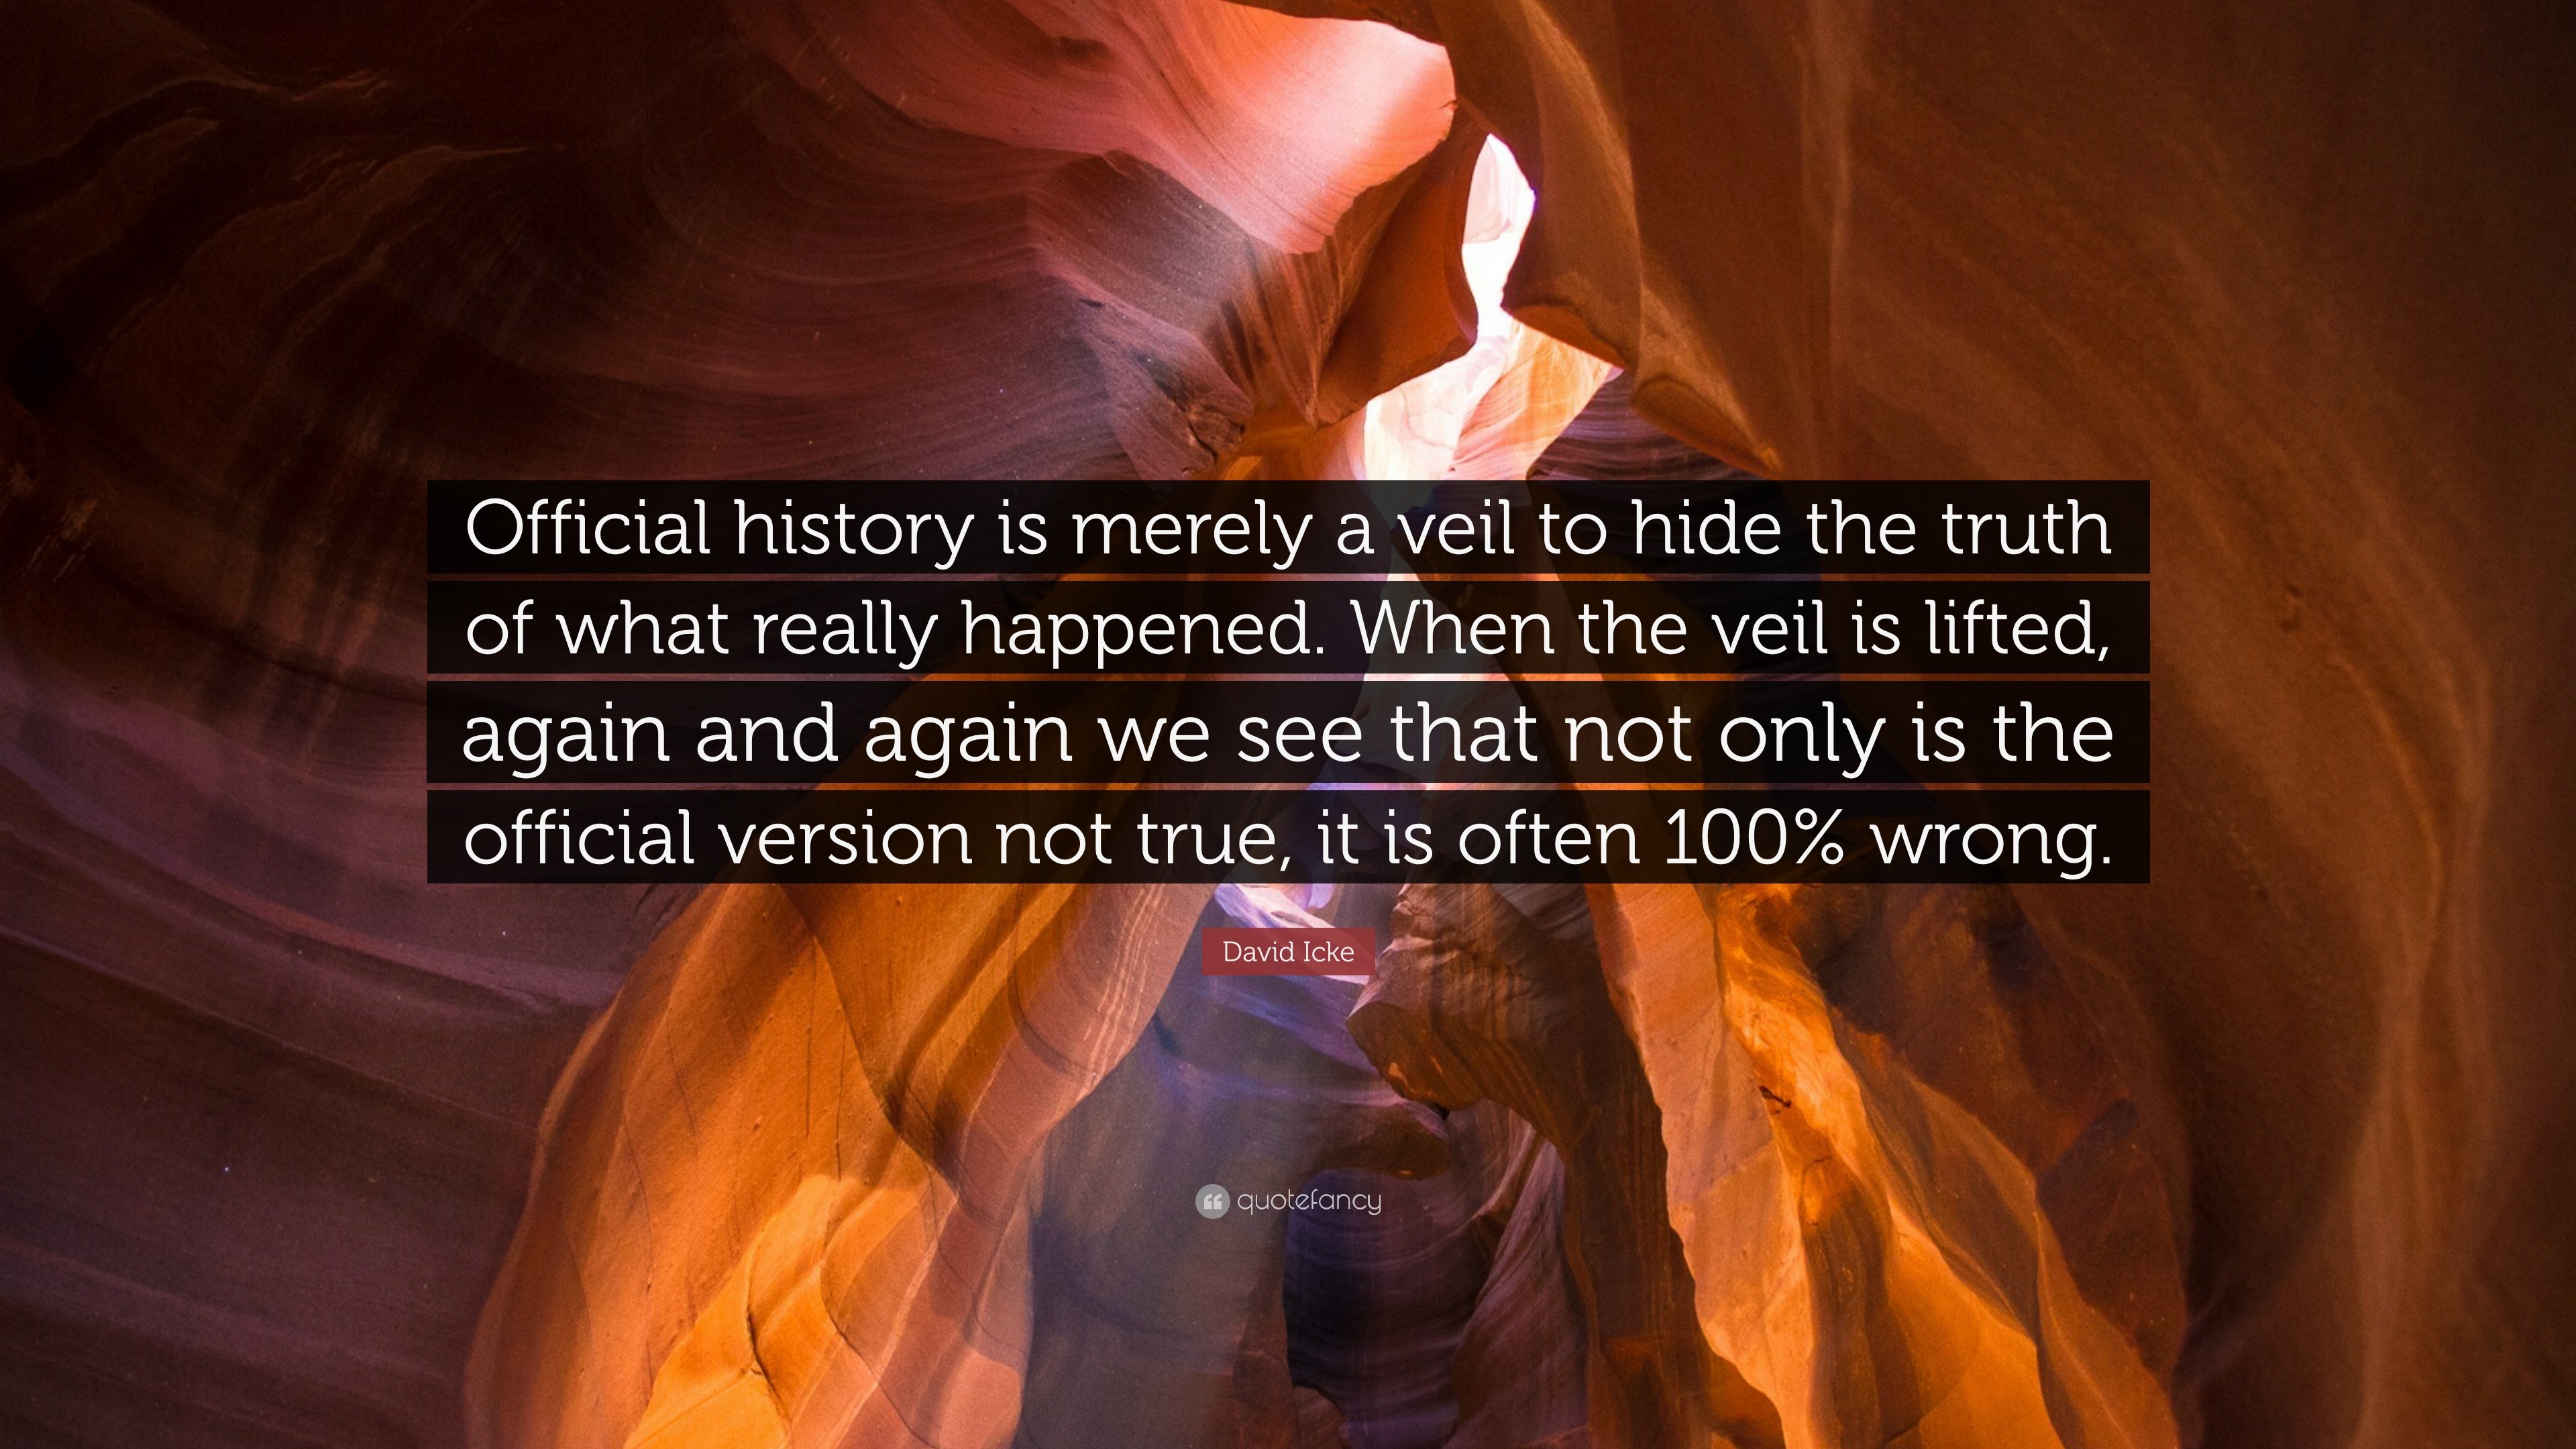 David Icke Quote: “Official history is merely a veil to hide the